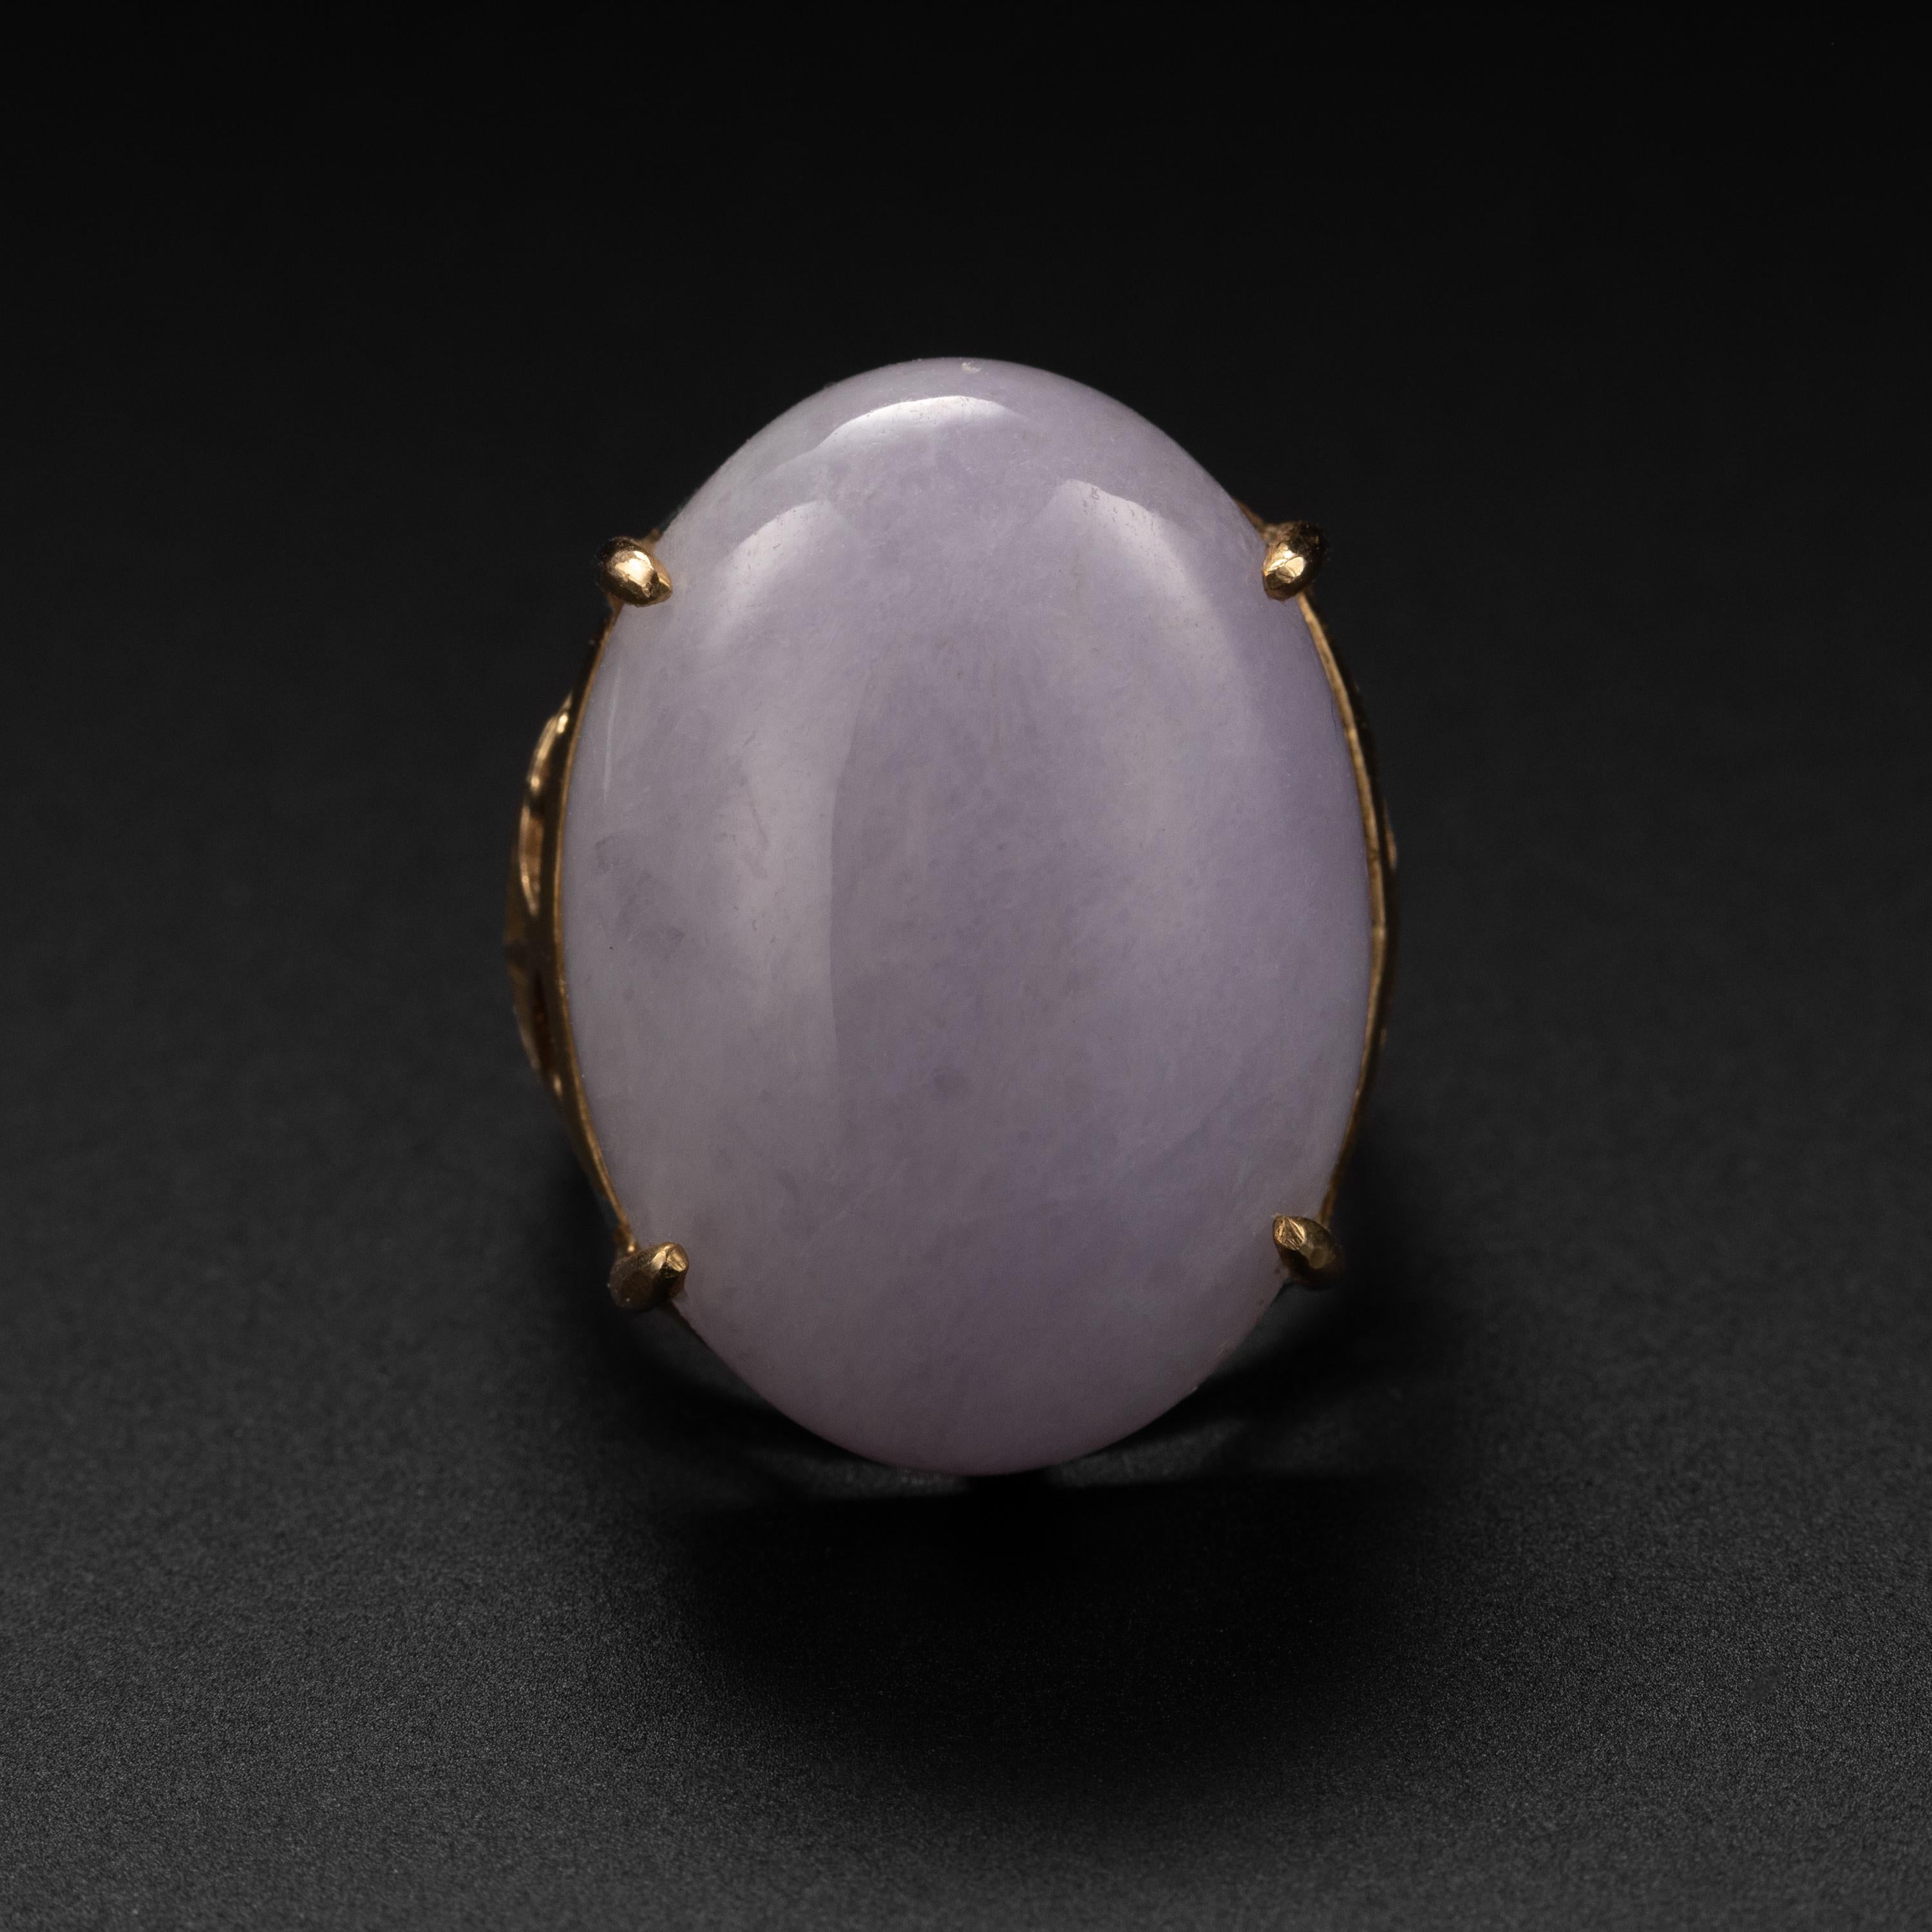 This lavender jade ring from the 1970s features an oval cabochon of translucent pale violet jade measuring 25mm x 118.8mm x 9.04mm. The impressive stone is prong-set within the hand-made 14k yellow gold setting which is marked on the interior 